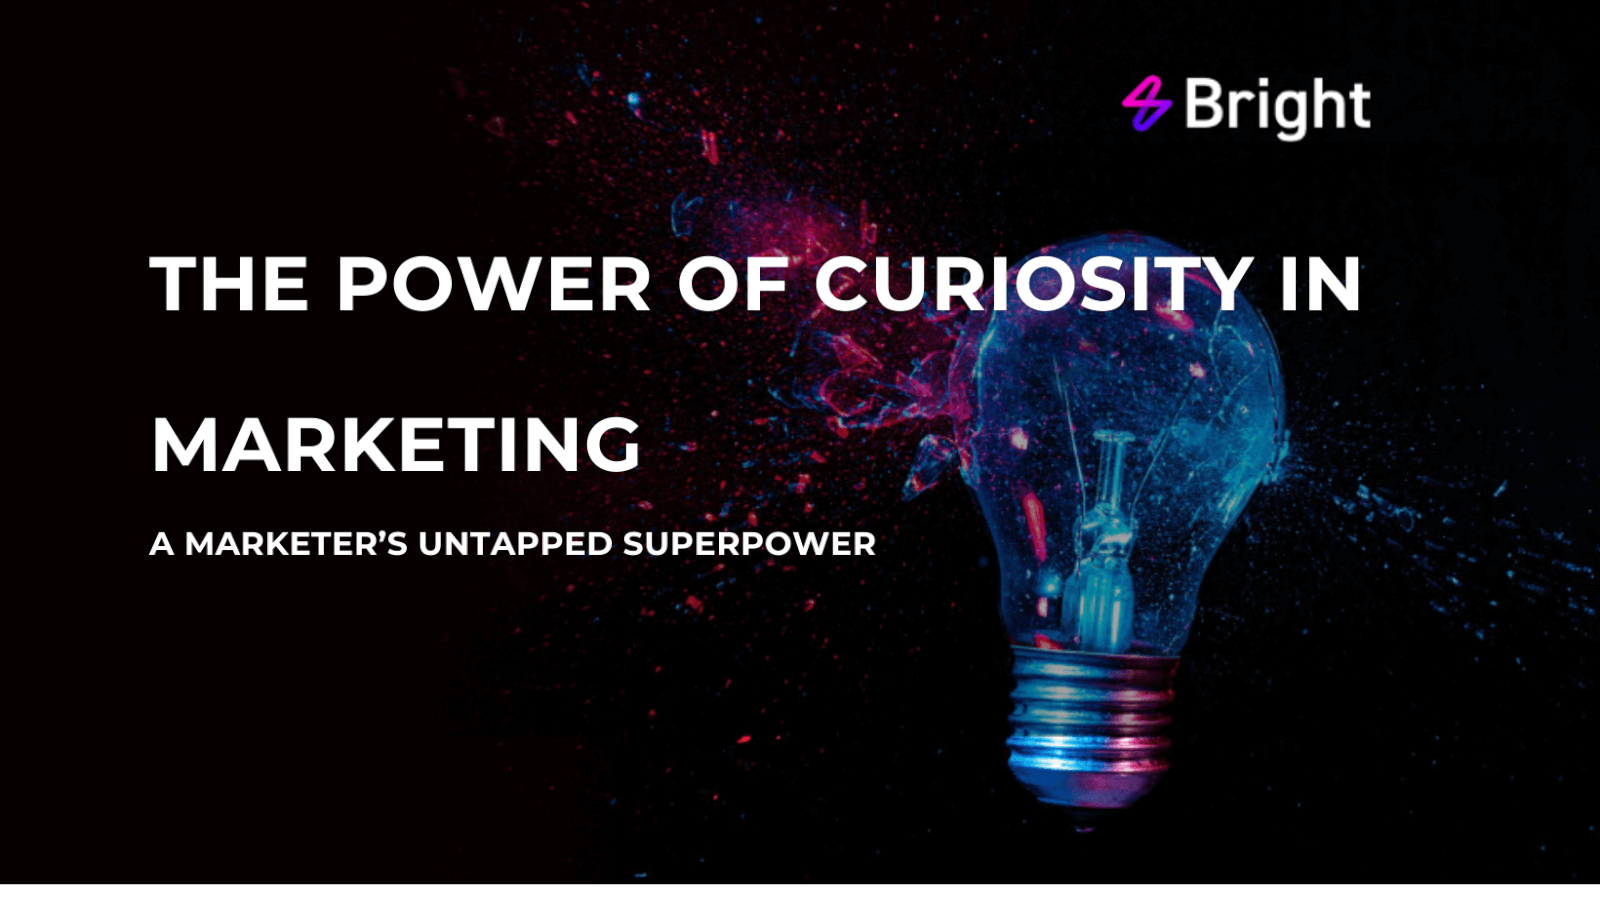 The power of curiosity in marketing